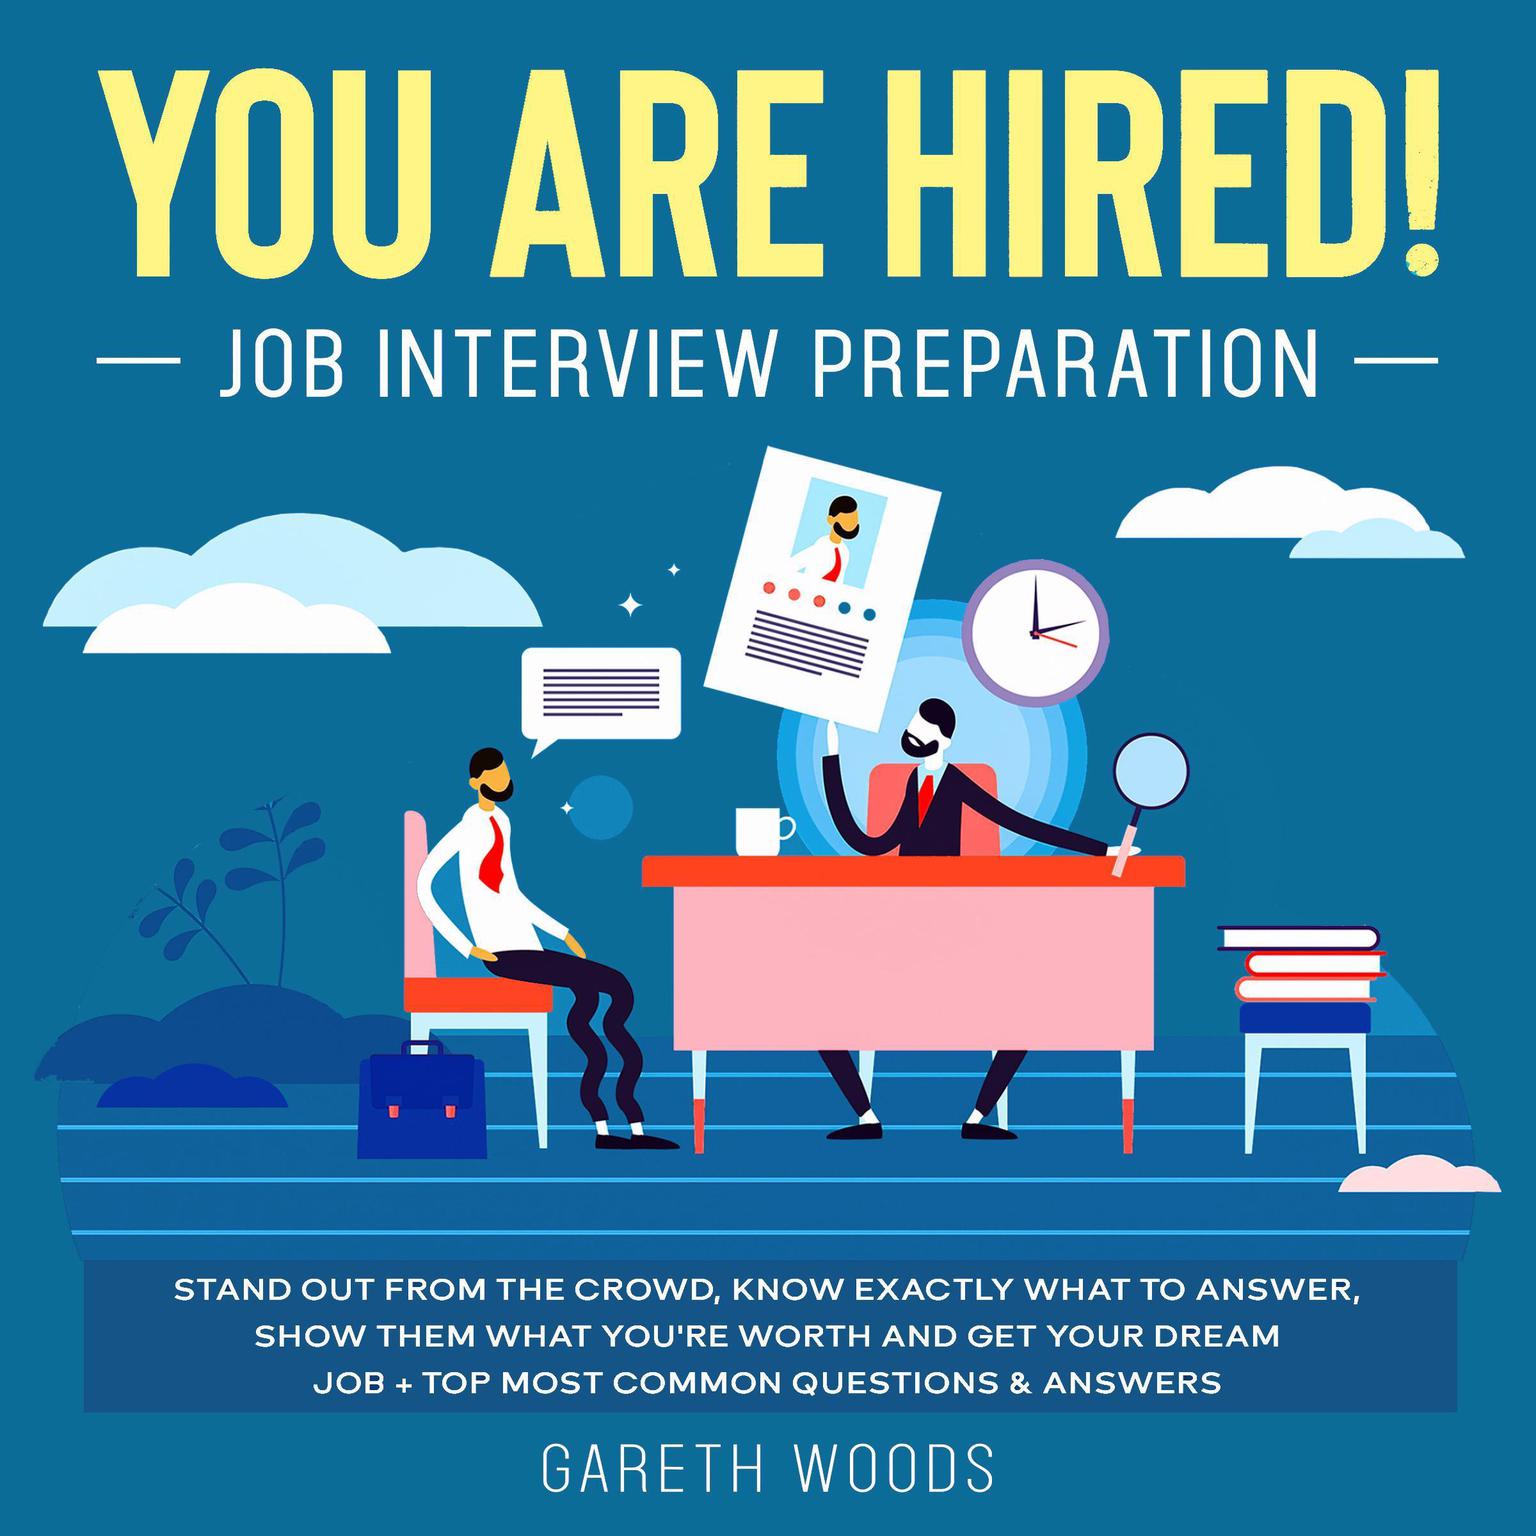 You Are Hired! Job Interview Preparation: Stand Out From the Crowd, Know Exactly What to Answer, Show Them What You’re Worth and Get Your Dream Job + Top Most Common Questions & Answers Audiobook, by Gareth Woods